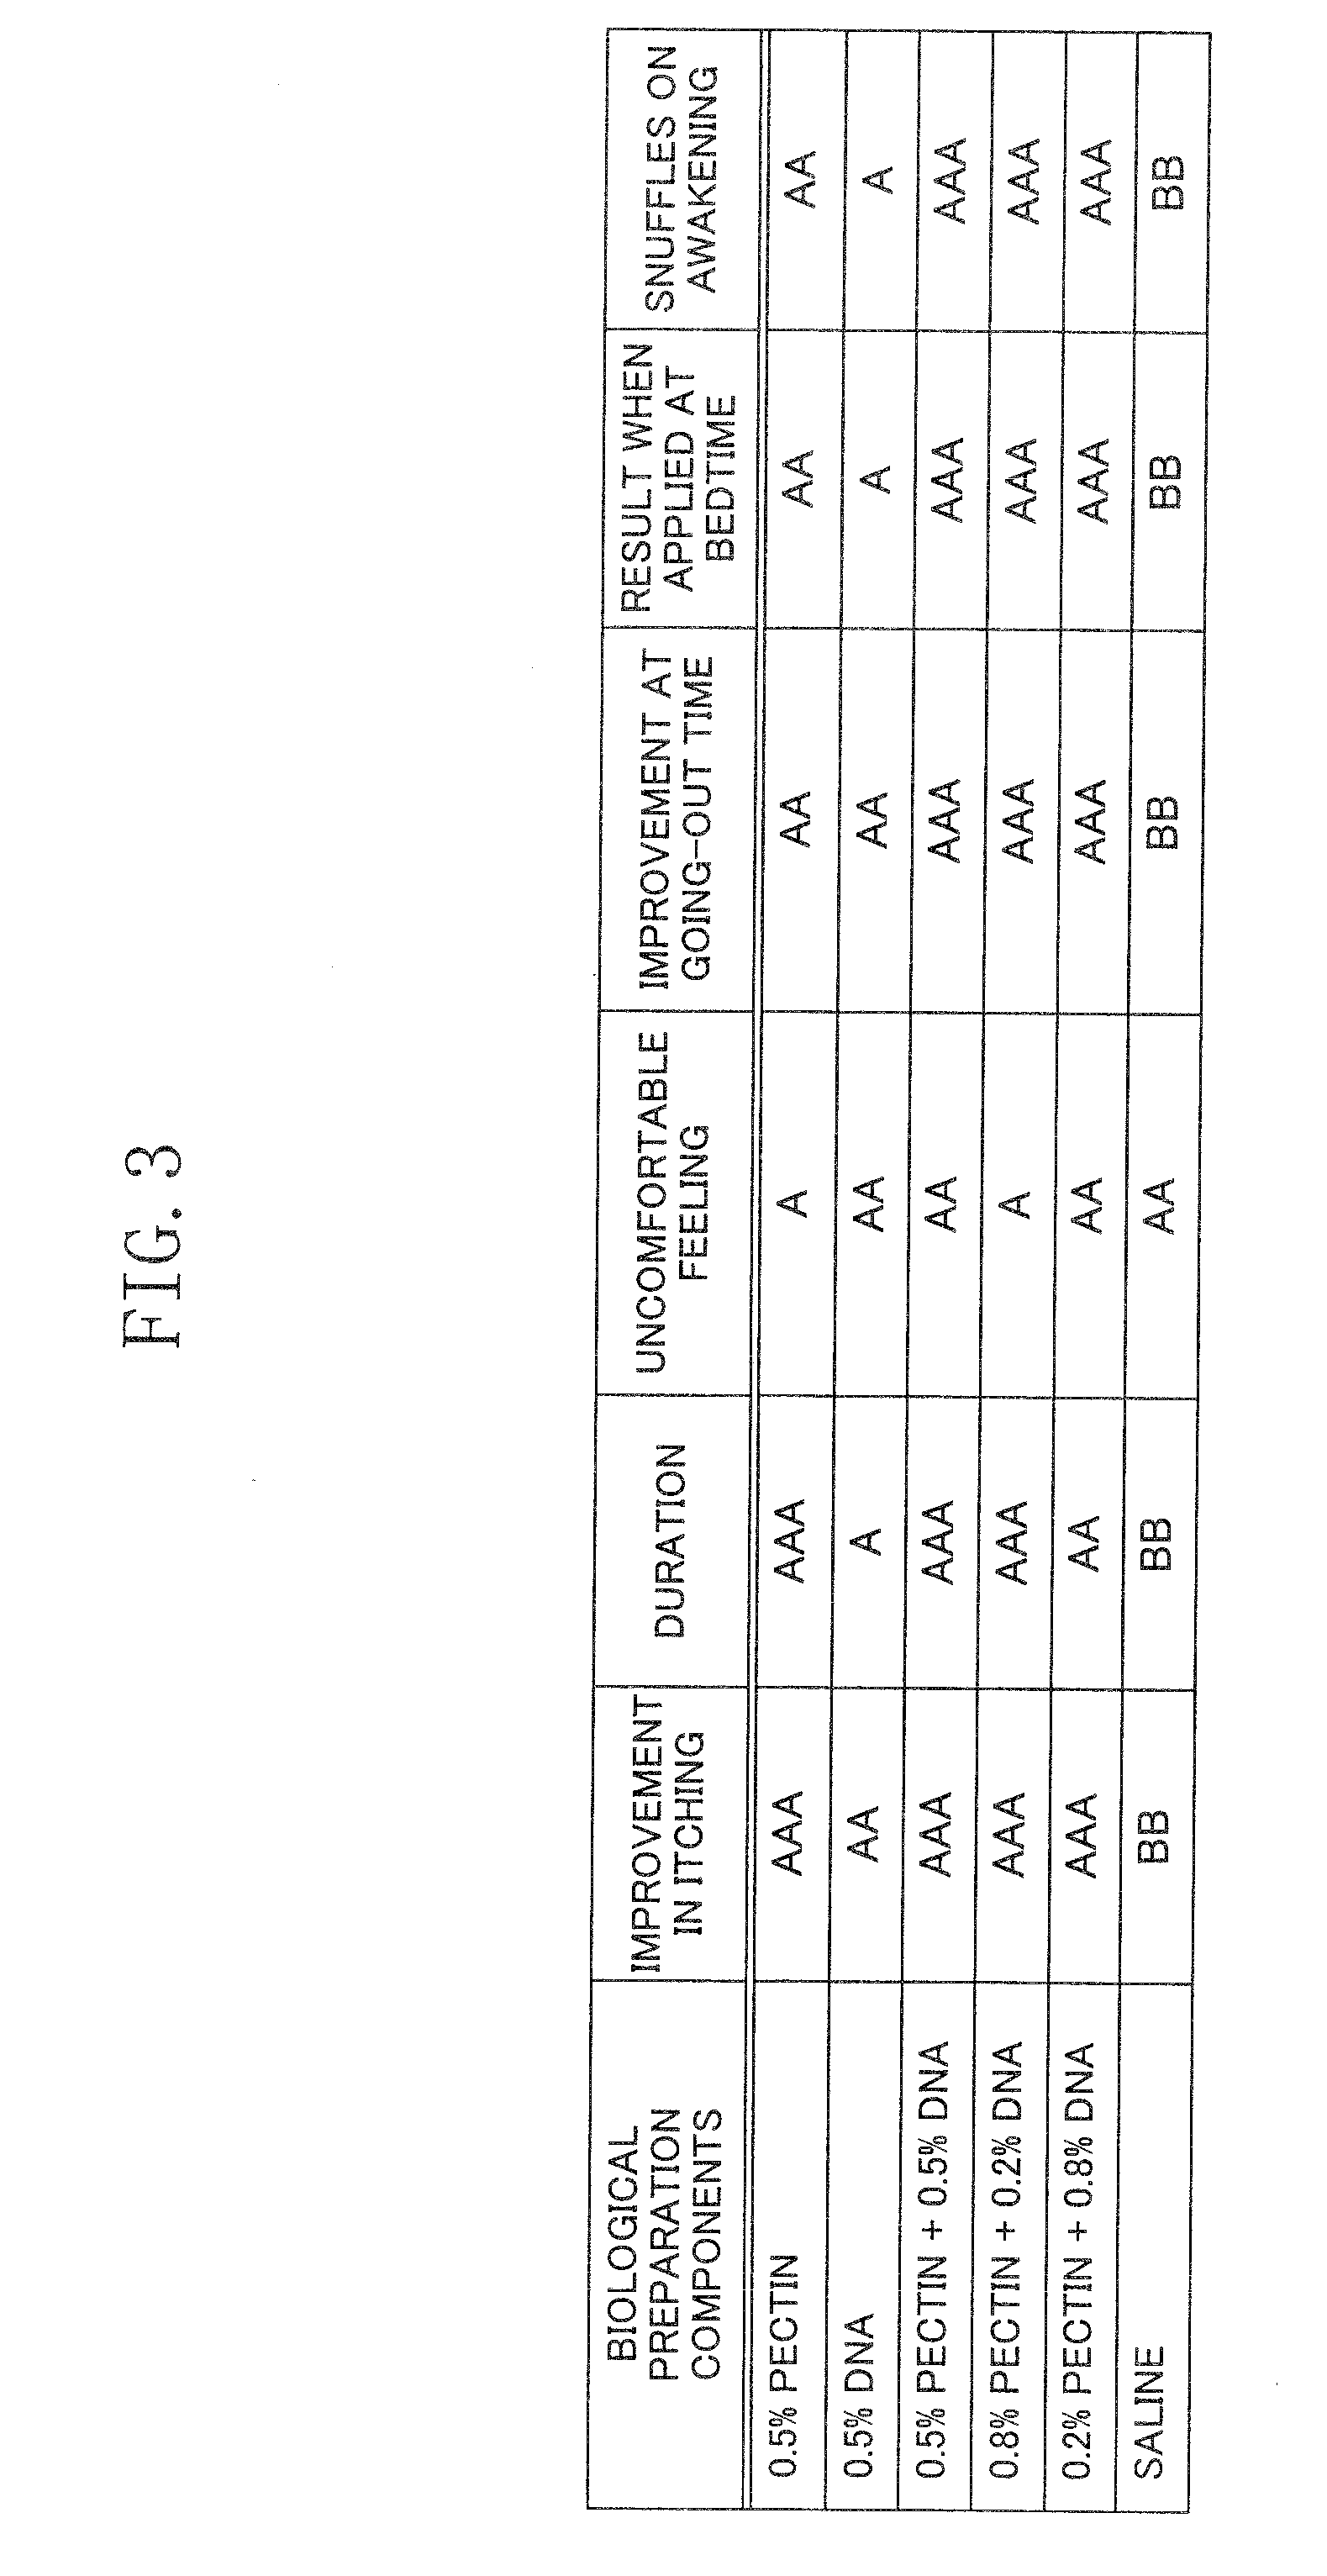 Method for inhibiting onset of or treating pollen allergy